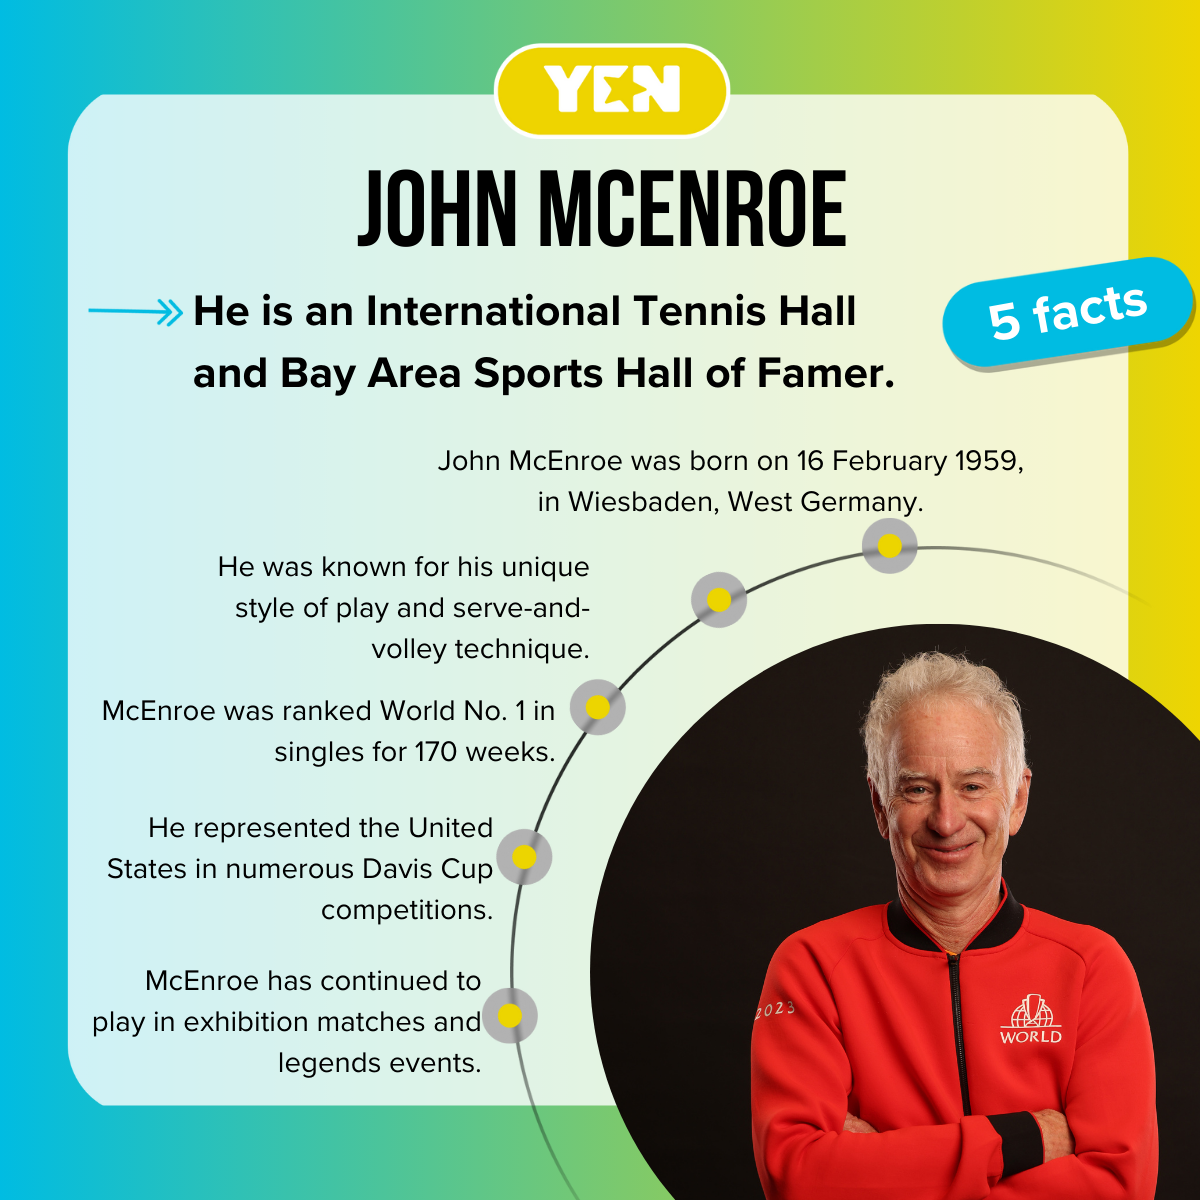 Top facts about John McEnroe.